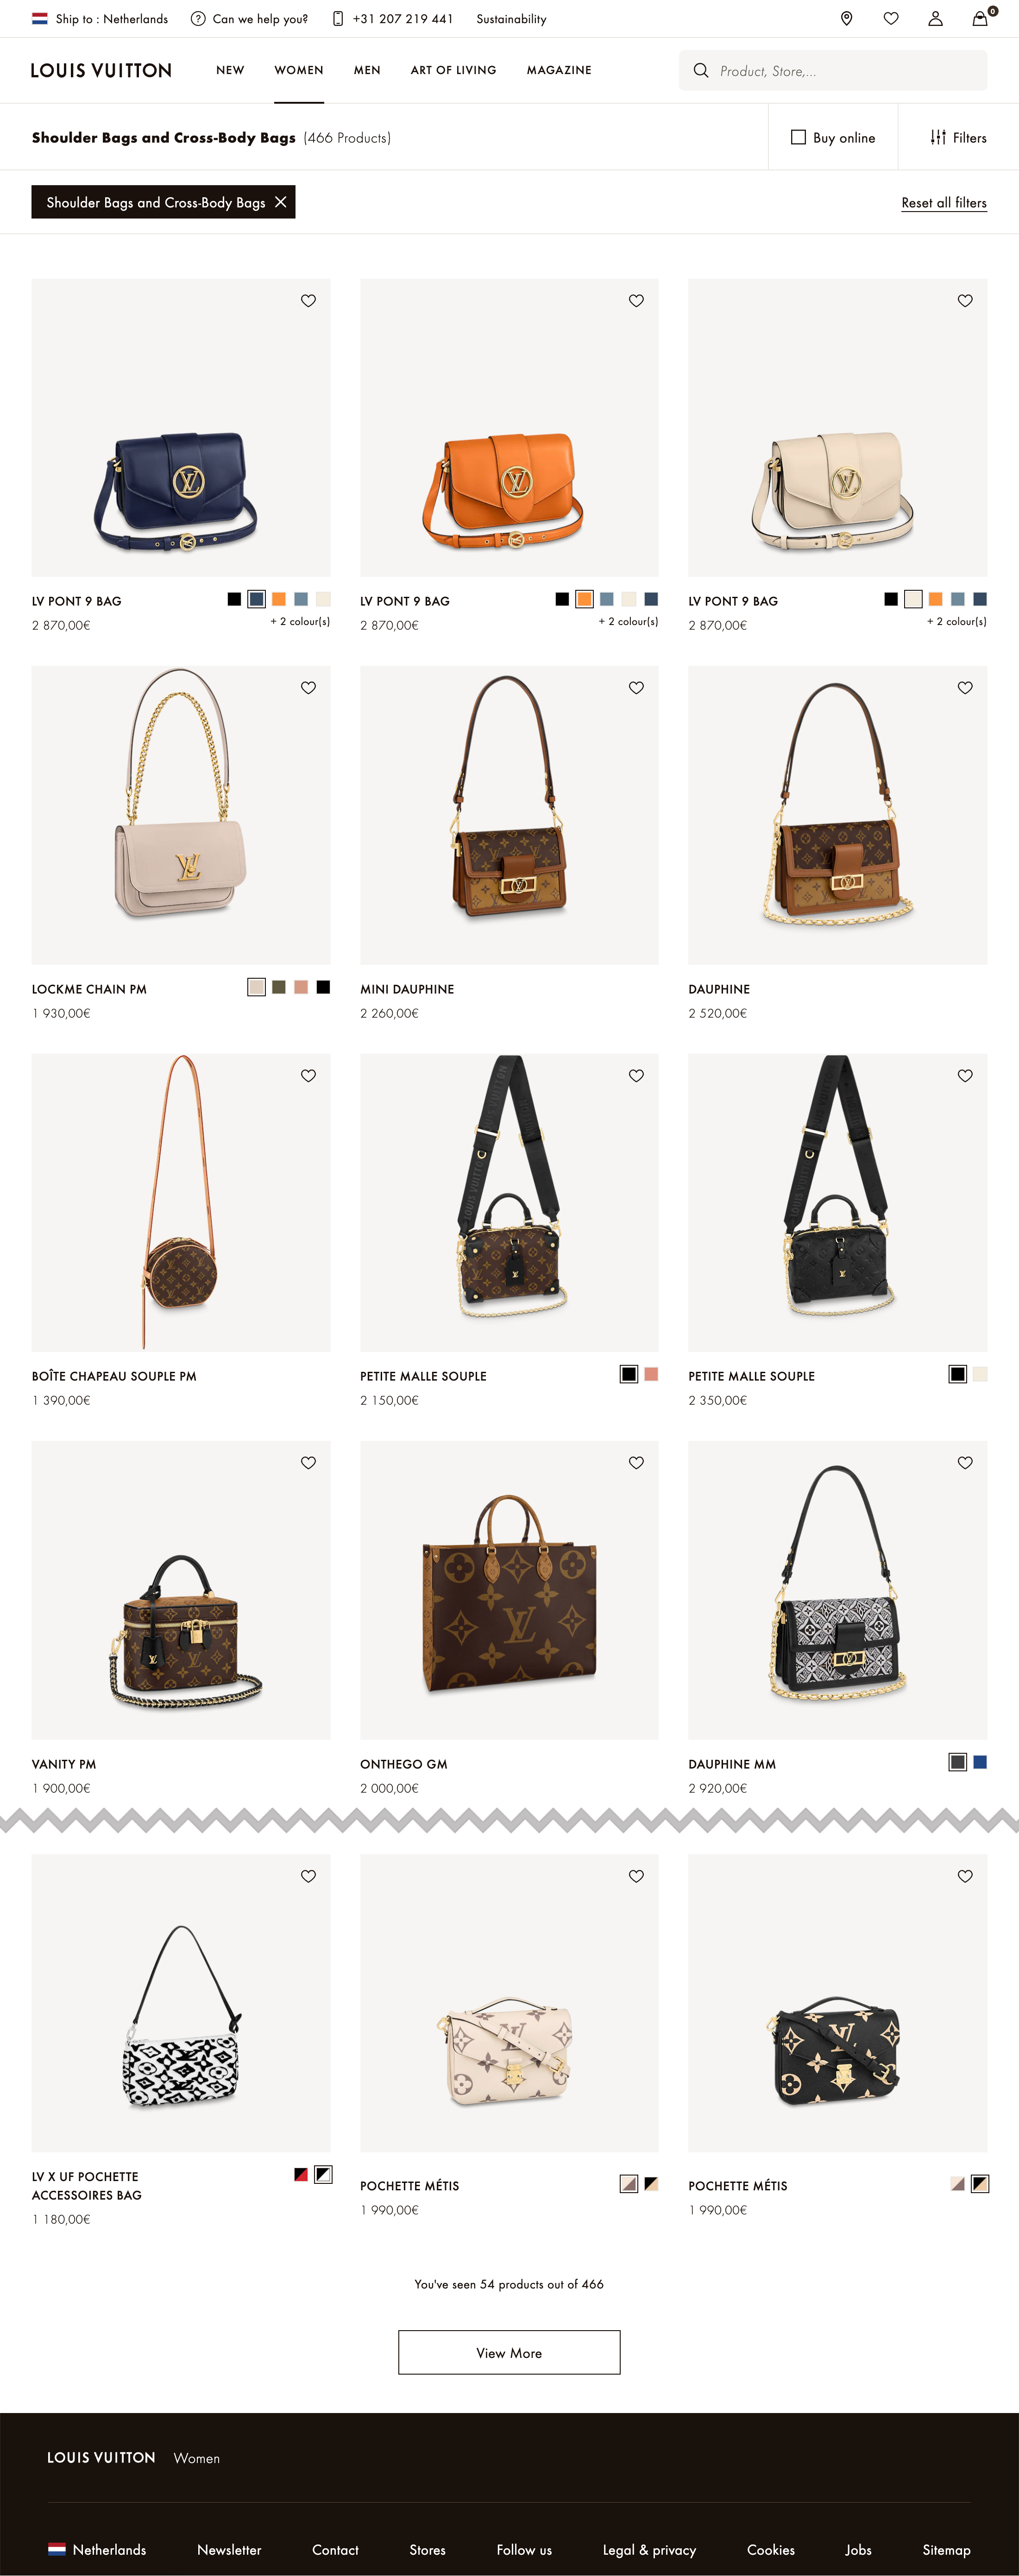 Louis Vuitton's Collection Page – 7 of 7 Collection Page Examples